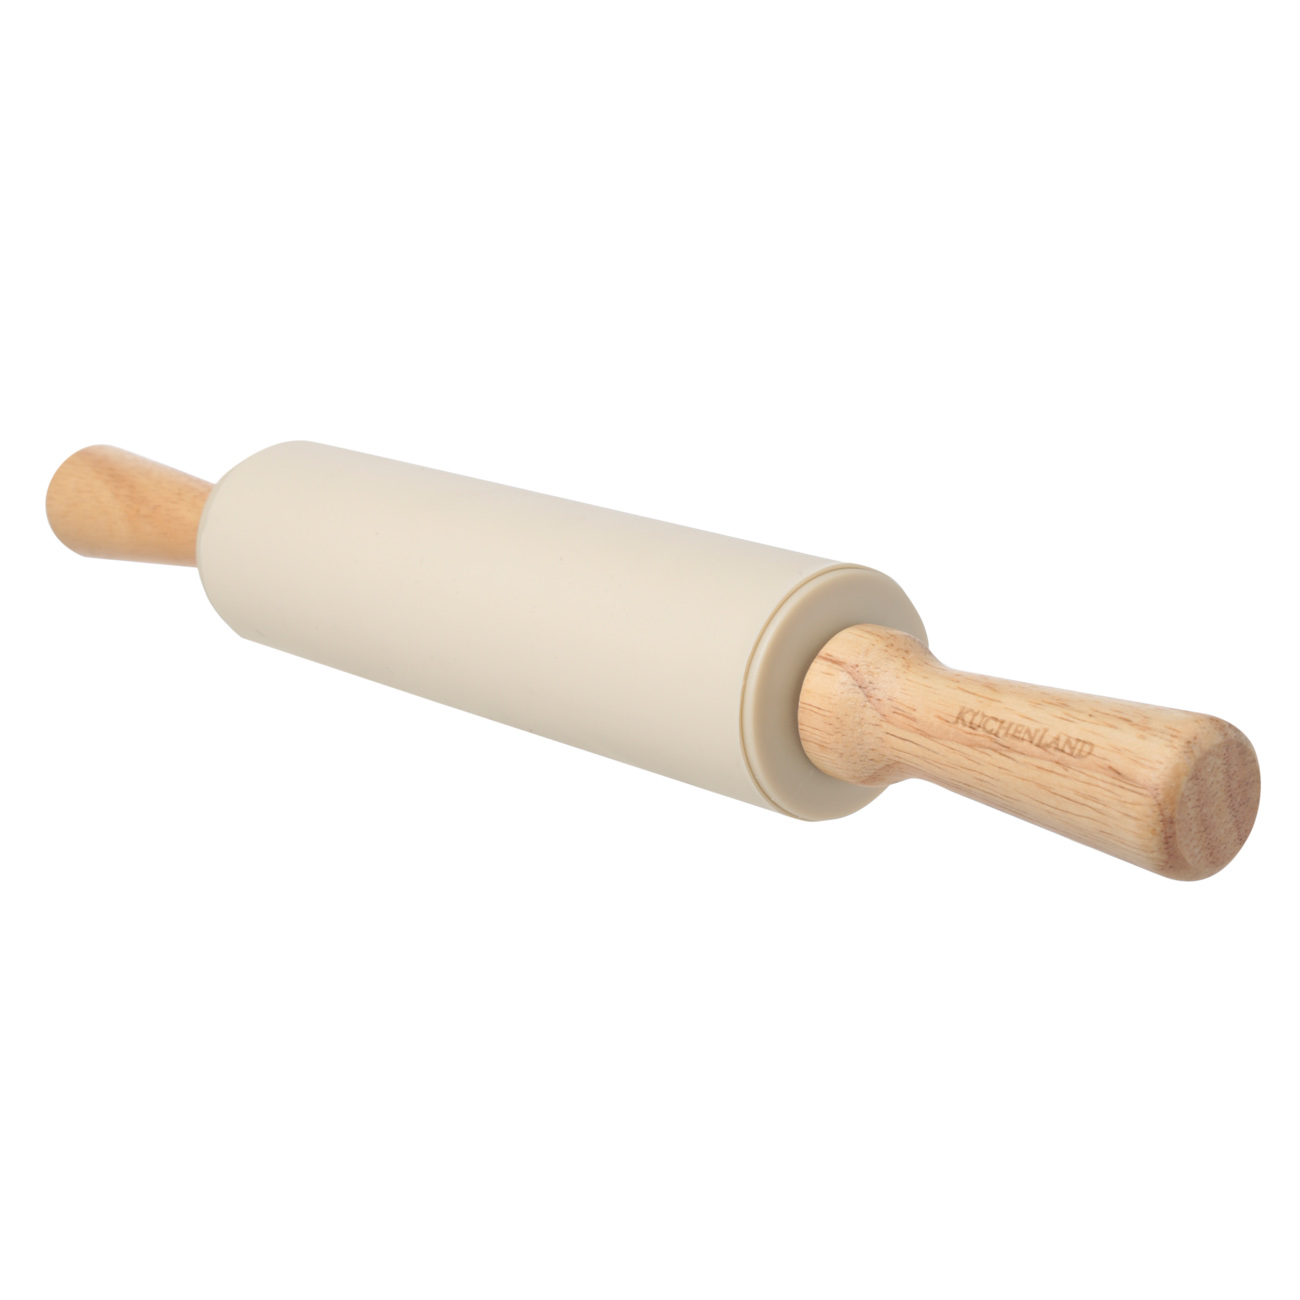 Rolling pin, 48 cm, silicone / wood, beige, Bakery изображение № 2